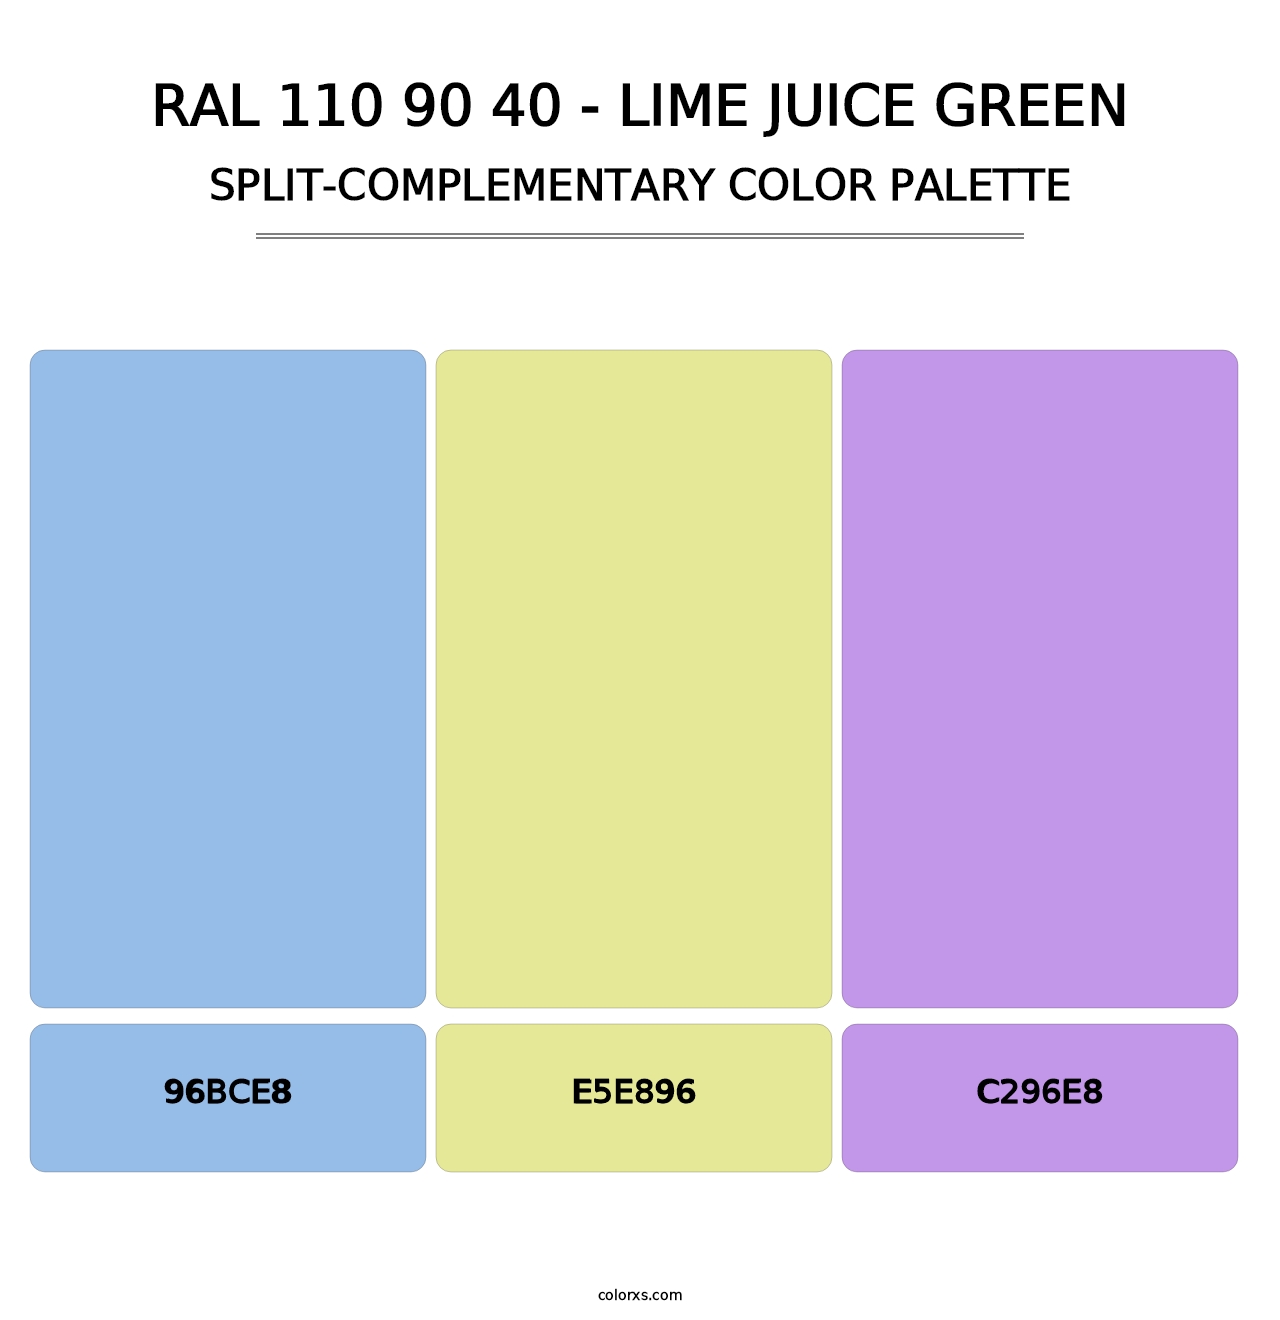 RAL 110 90 40 - Lime Juice Green - Split-Complementary Color Palette